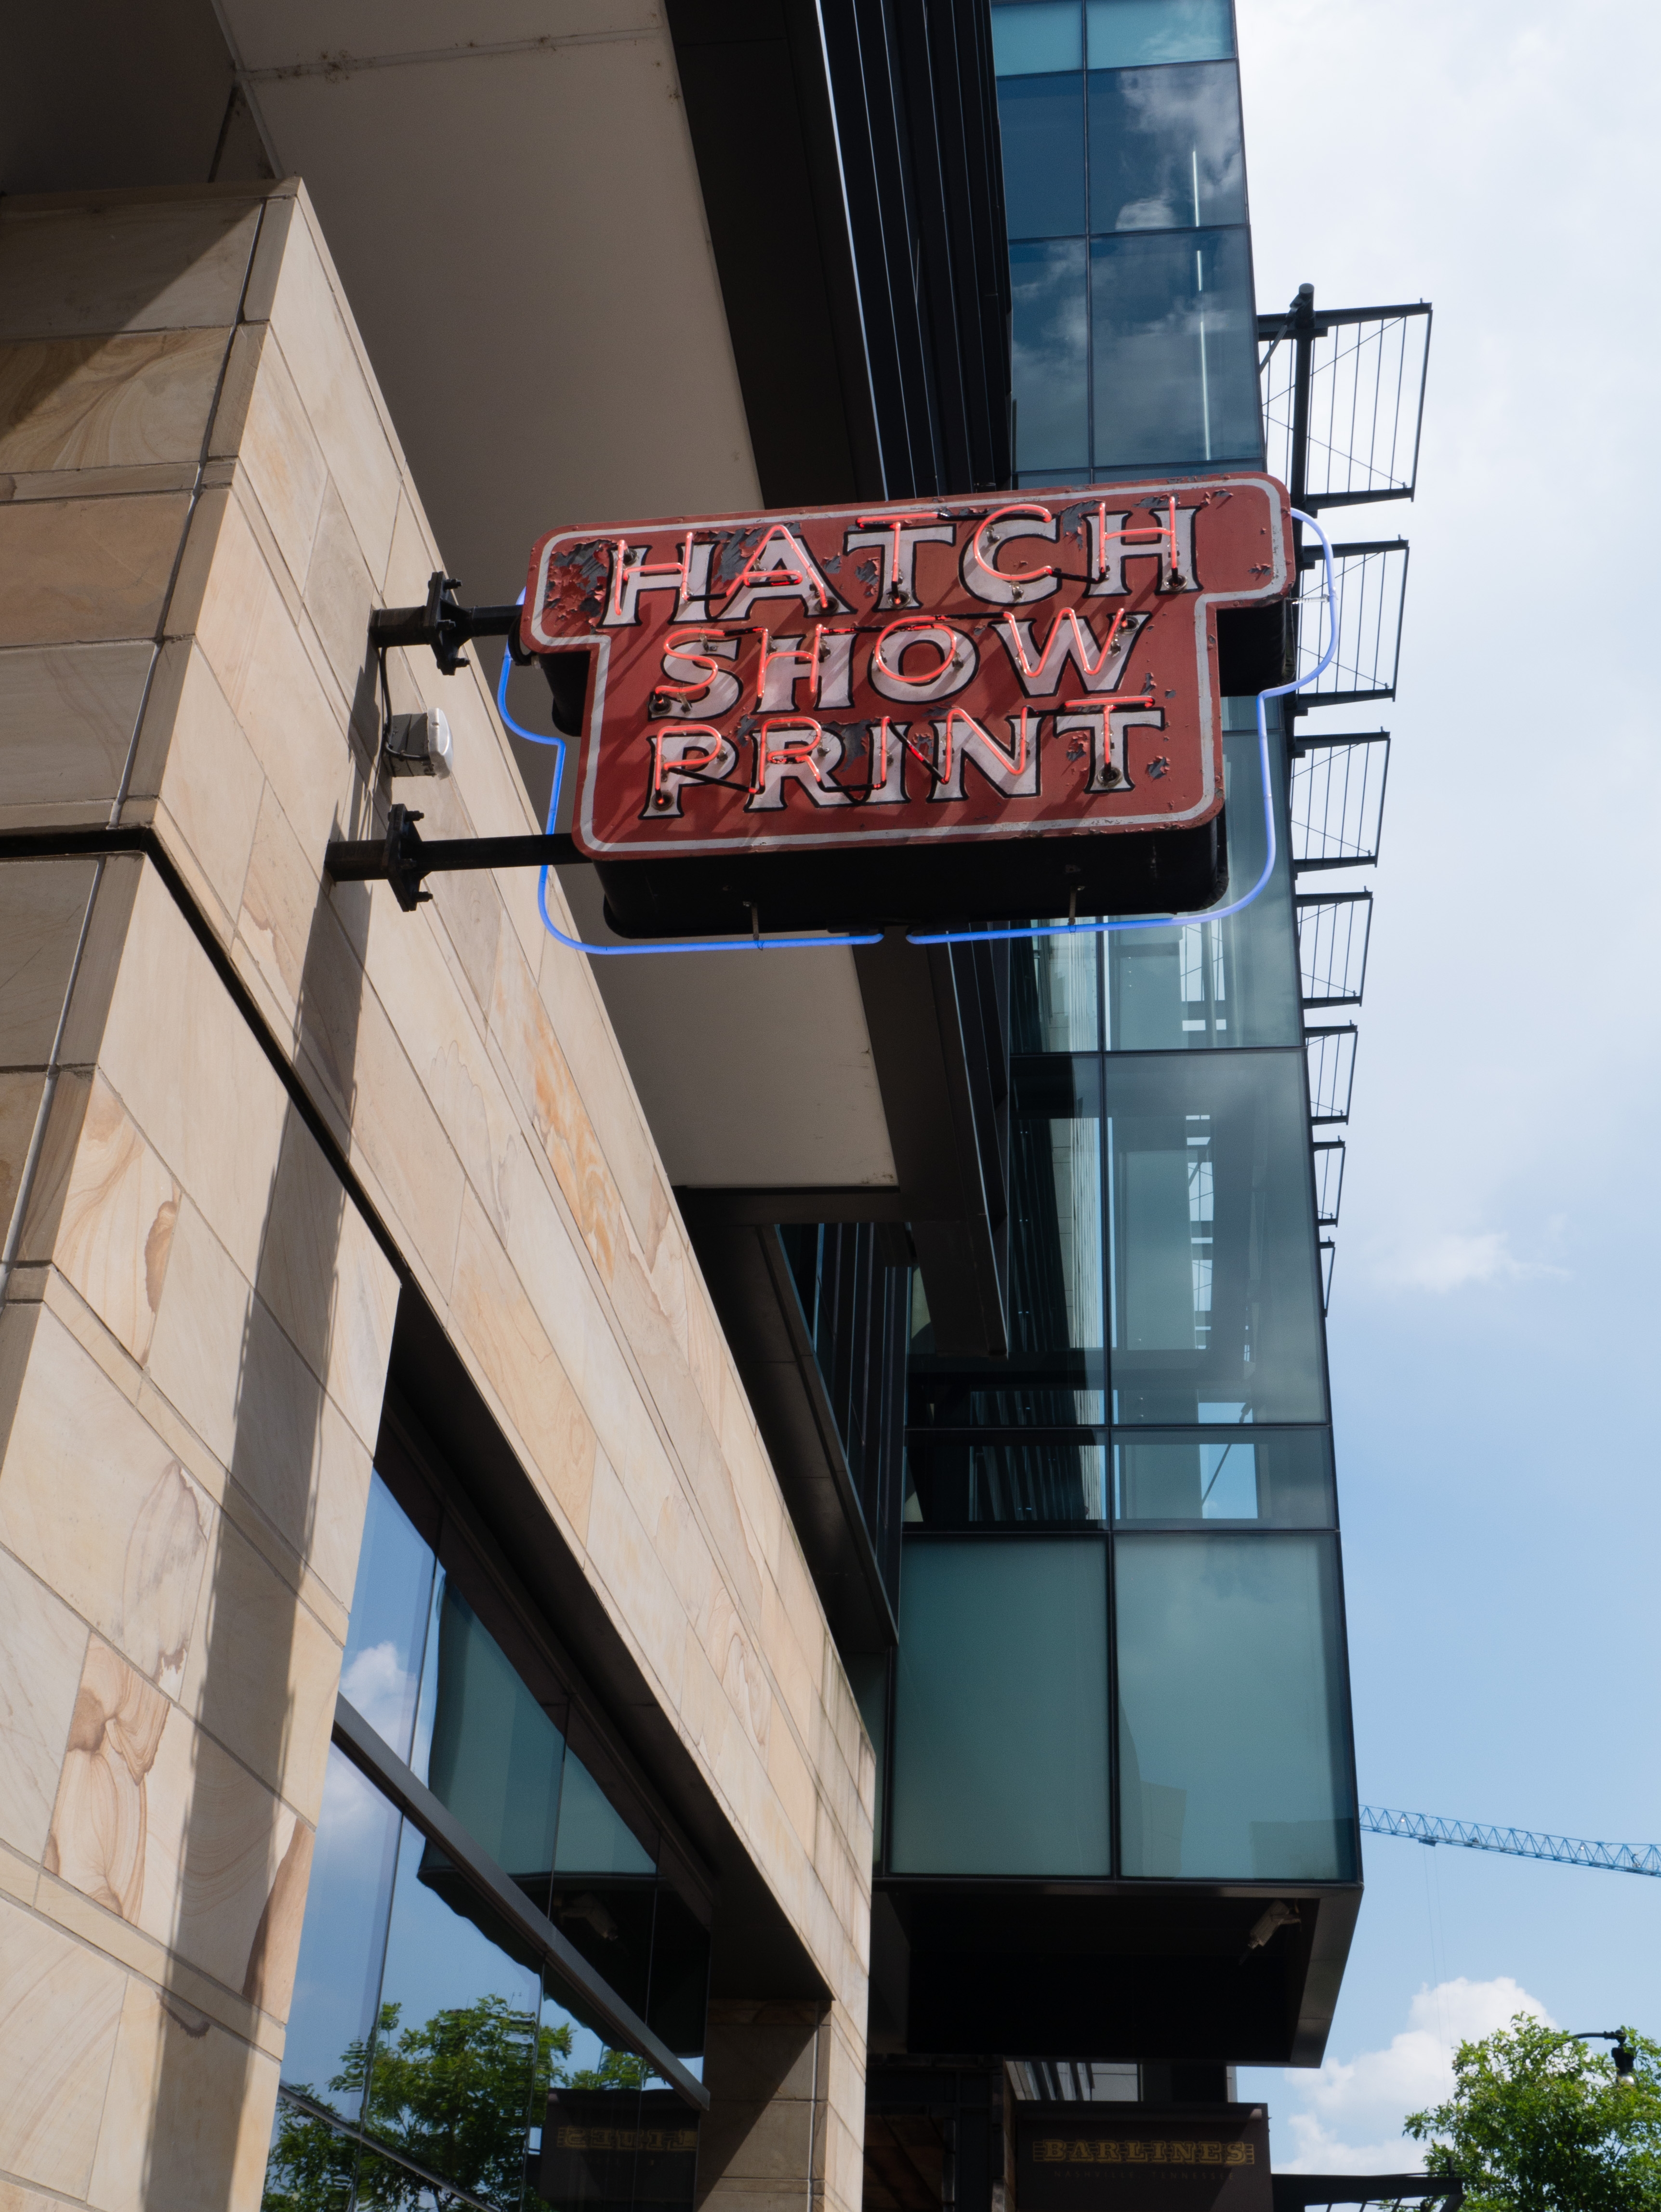 The Hatch Show Print sign off the street